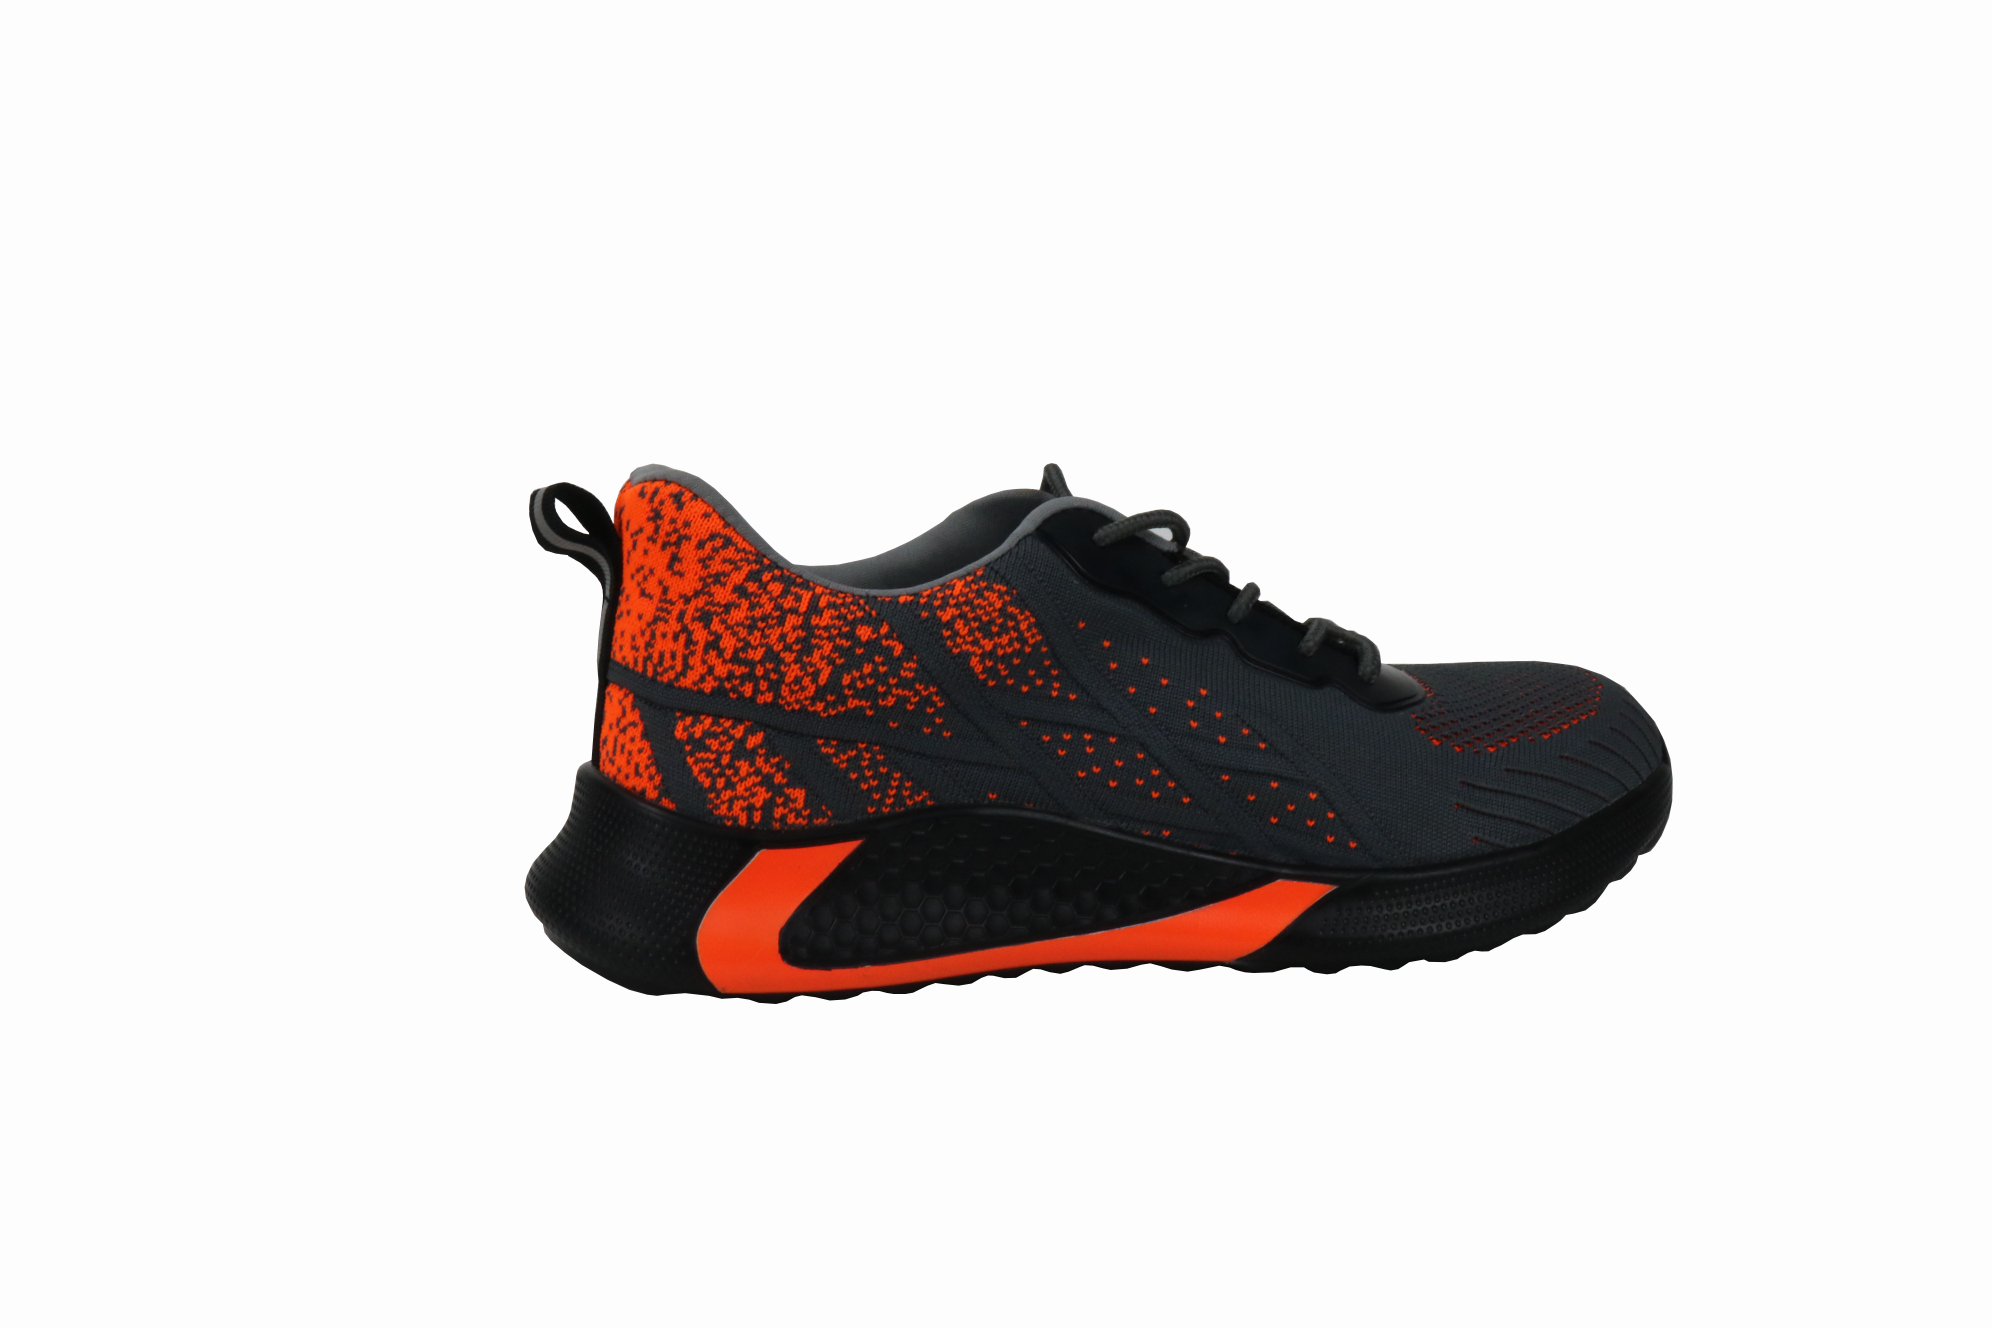 light Weight Breathable Fly Knit Mesh Safety Shoes